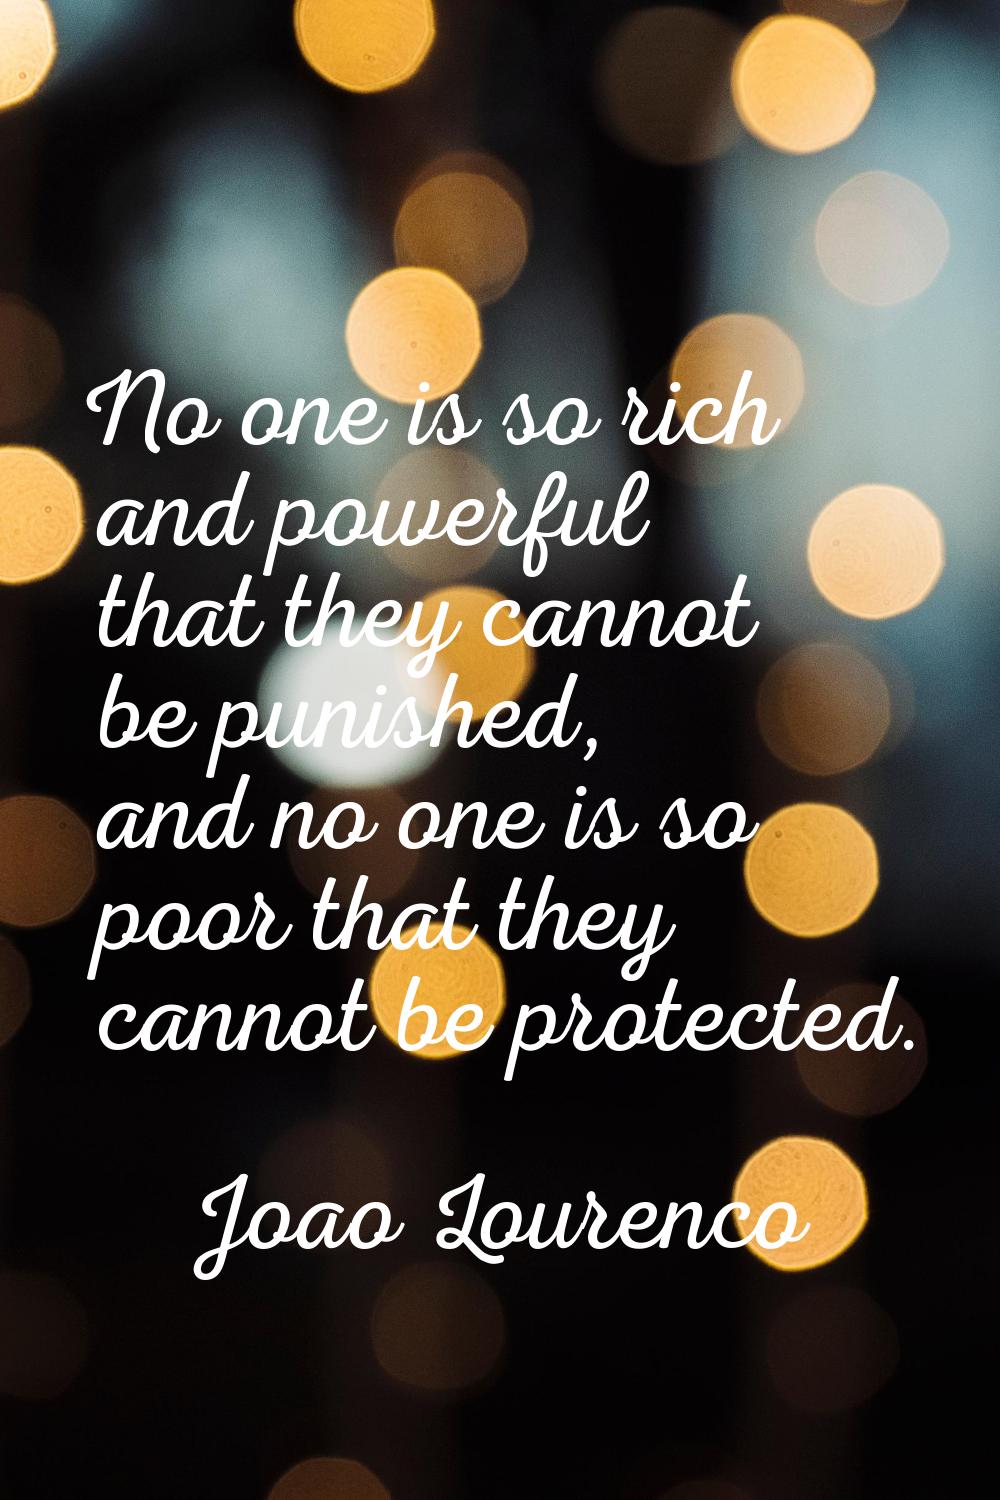 No one is so rich and powerful that they cannot be punished, and no one is so poor that they cannot